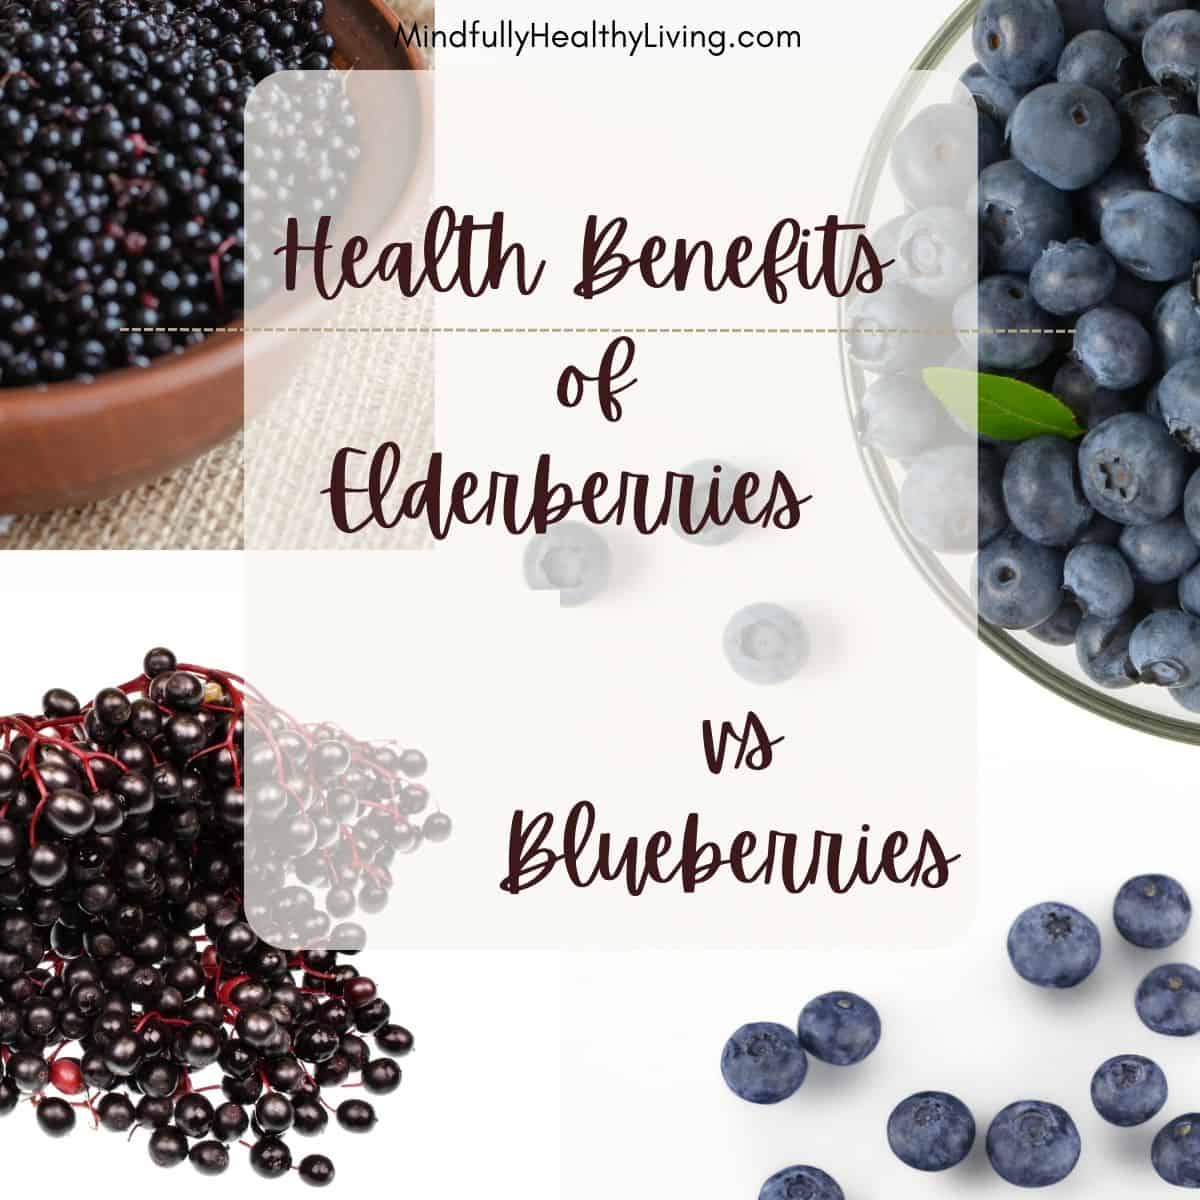 A photo with a white background and blueberries in two of the corners and black elderberries in the other two corners with a rounded white transparent square in the middle and text overlay that says "Mindfullyhealthyliving.com health benefits of elderberries vs blueberries.